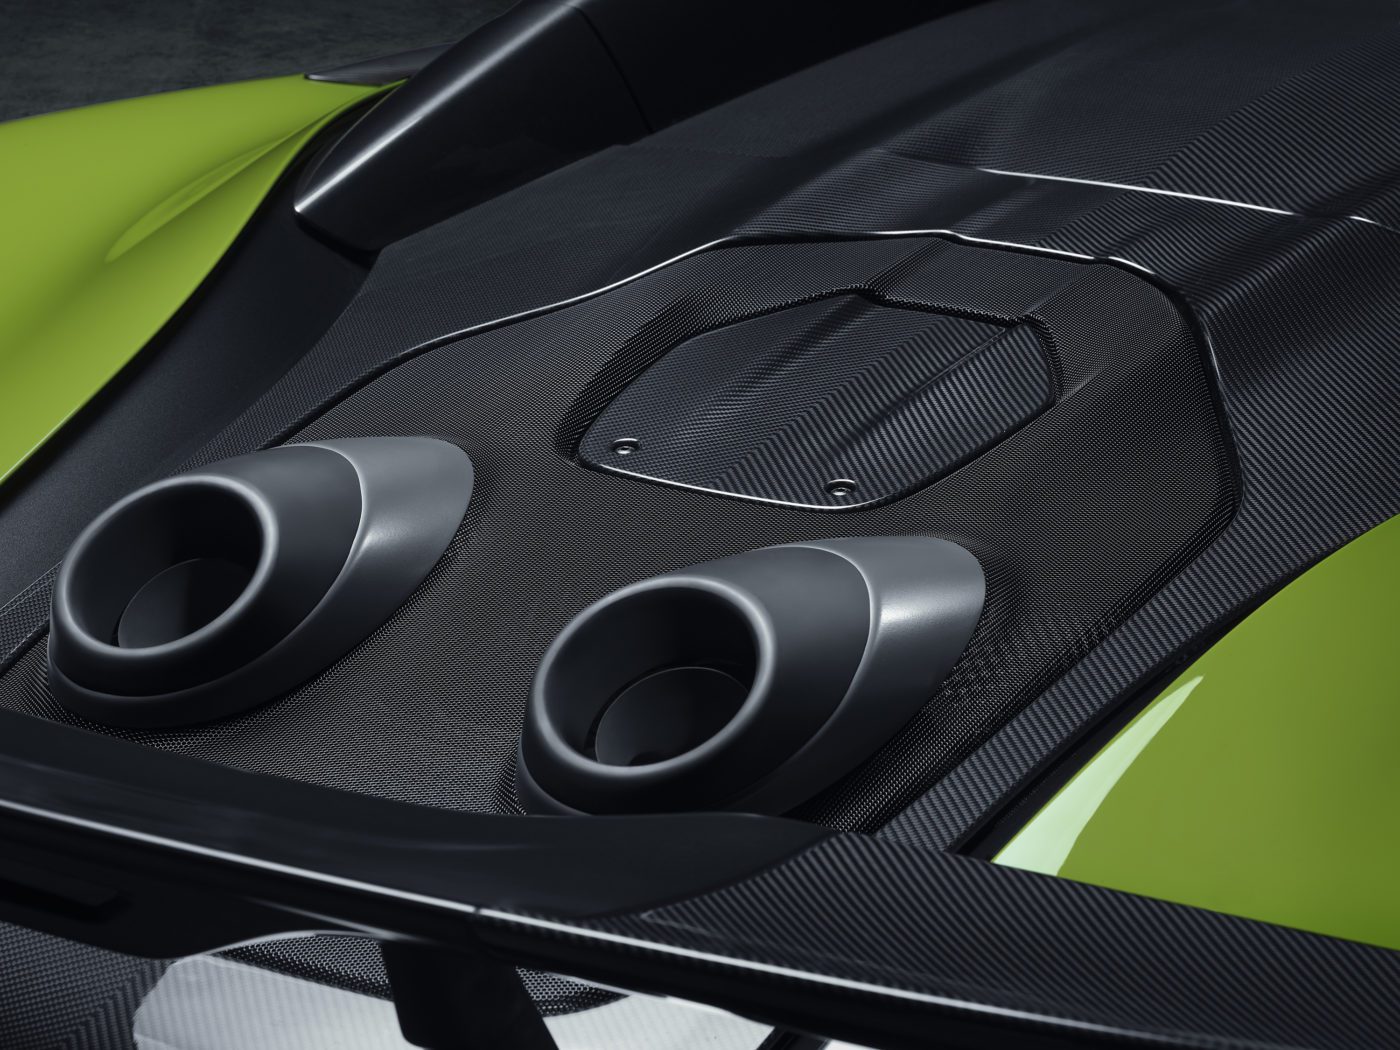 The exhaust tips can shoot flames on the McLaren 600LT Spider.